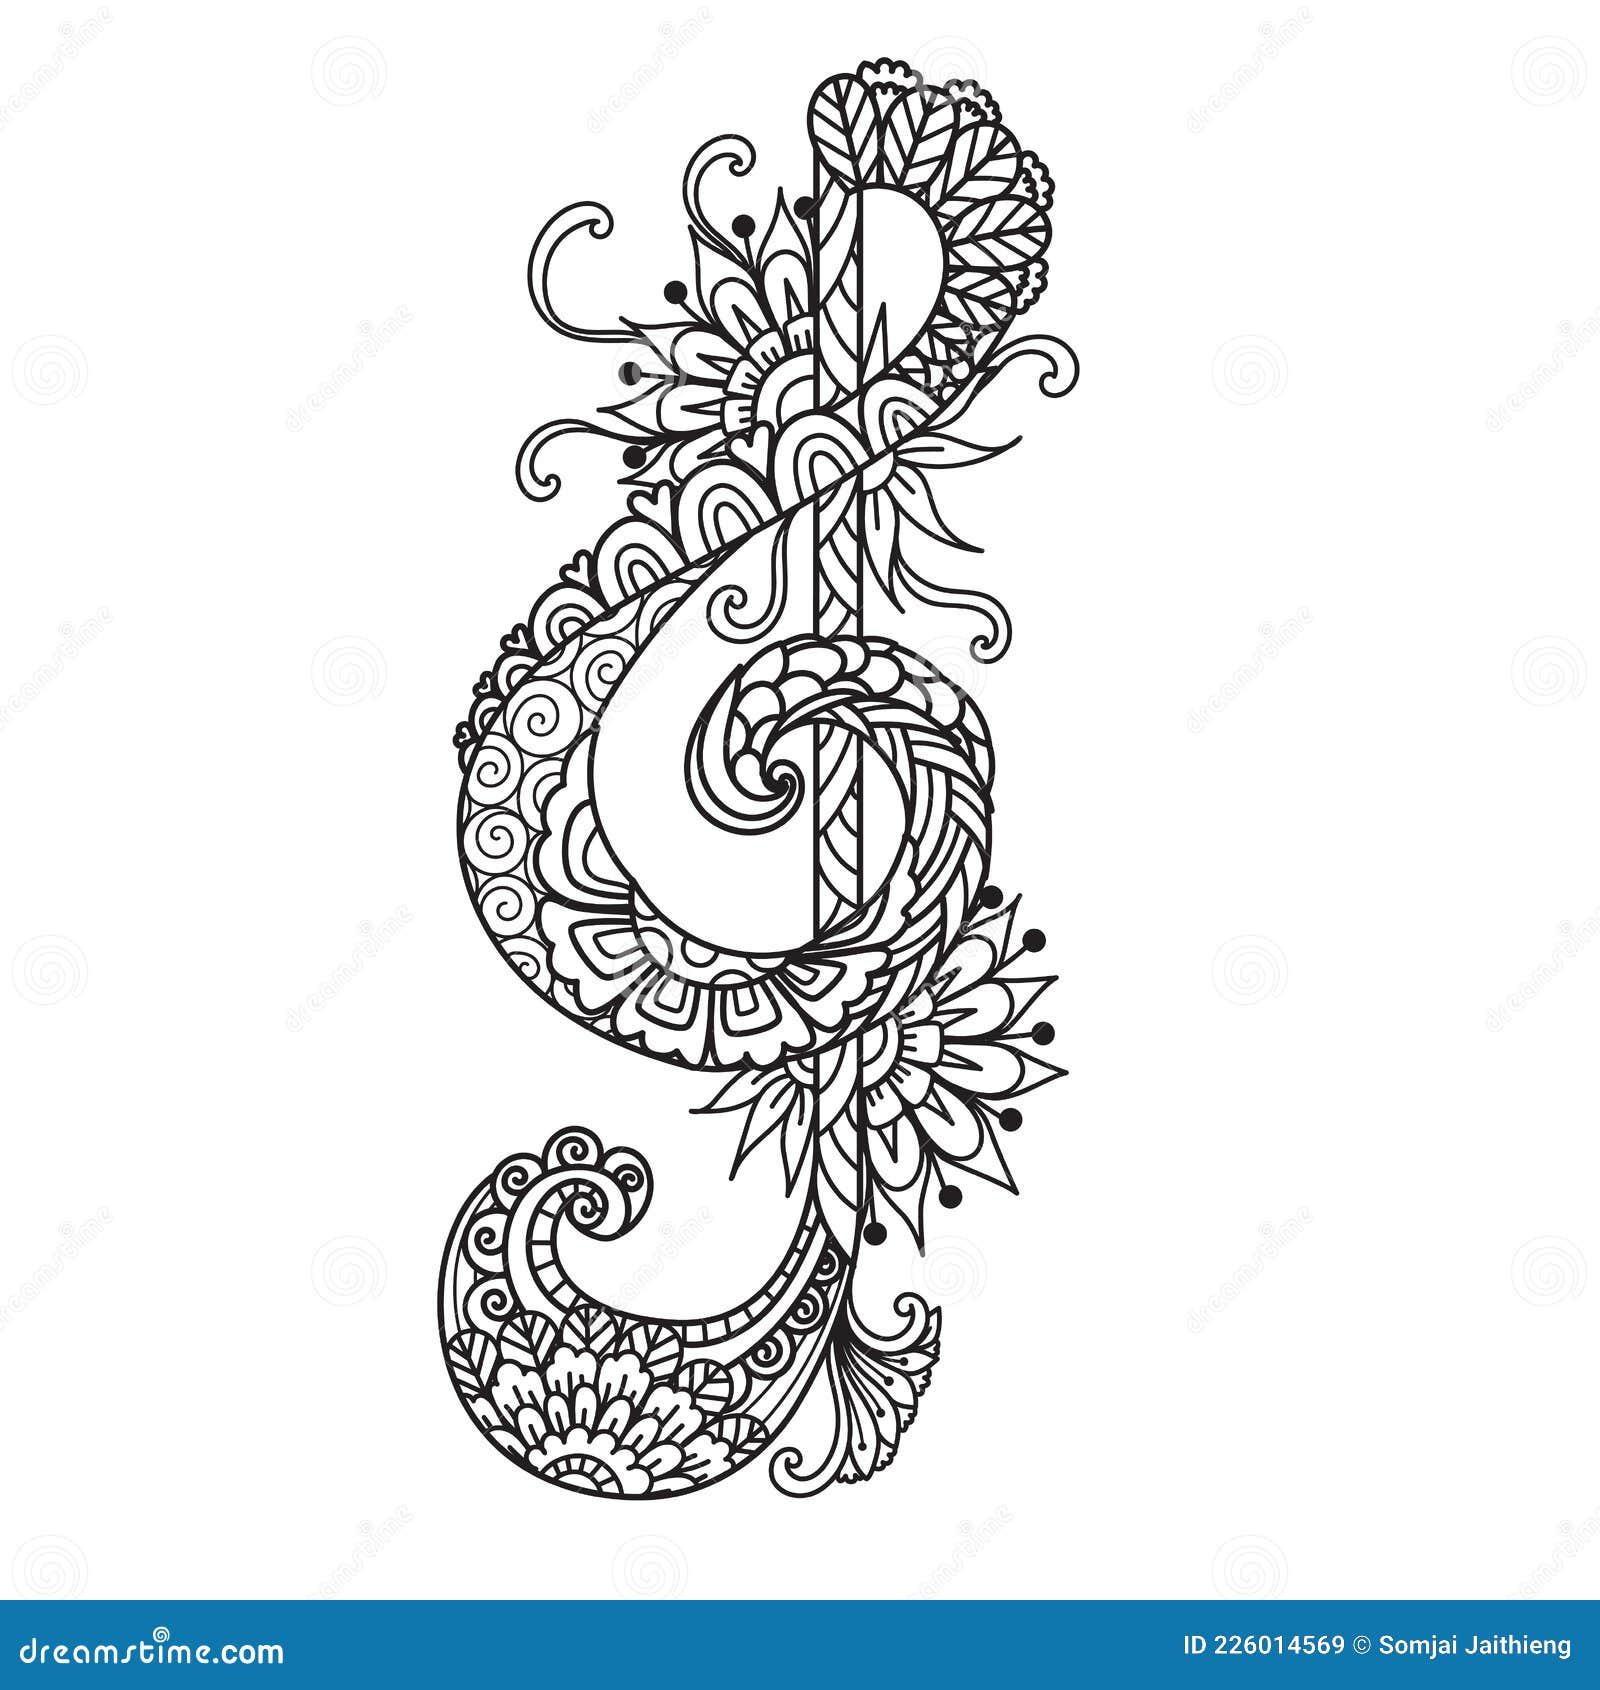 Mandala Treble Clef for Printing on Product,engraving,paper Cut